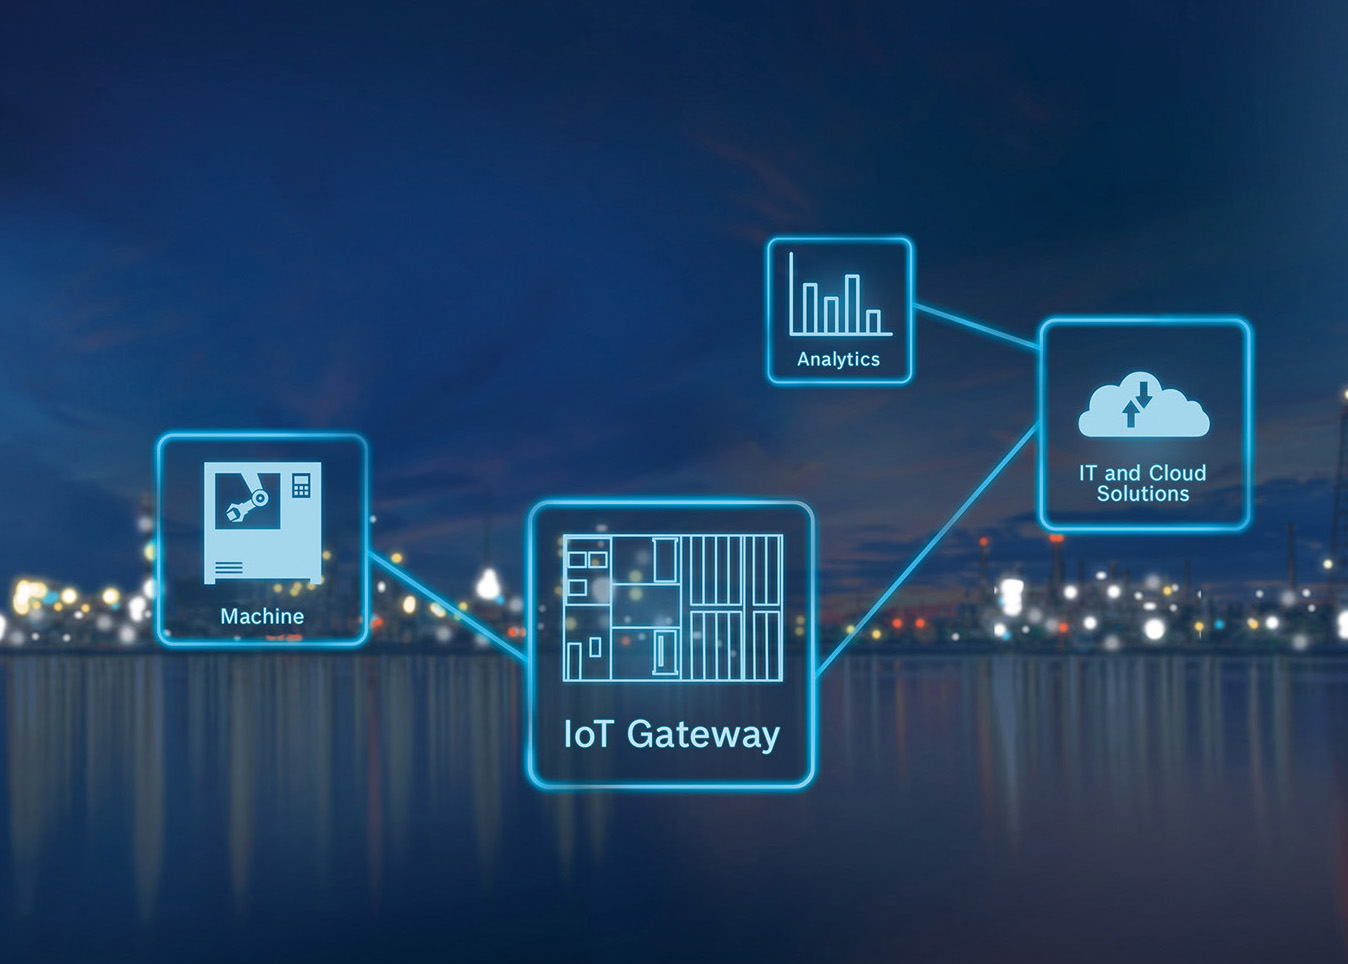 Bosch Rexroth introduces the IoT Gateway as part of its Industry 4.0 Technology Portfolio